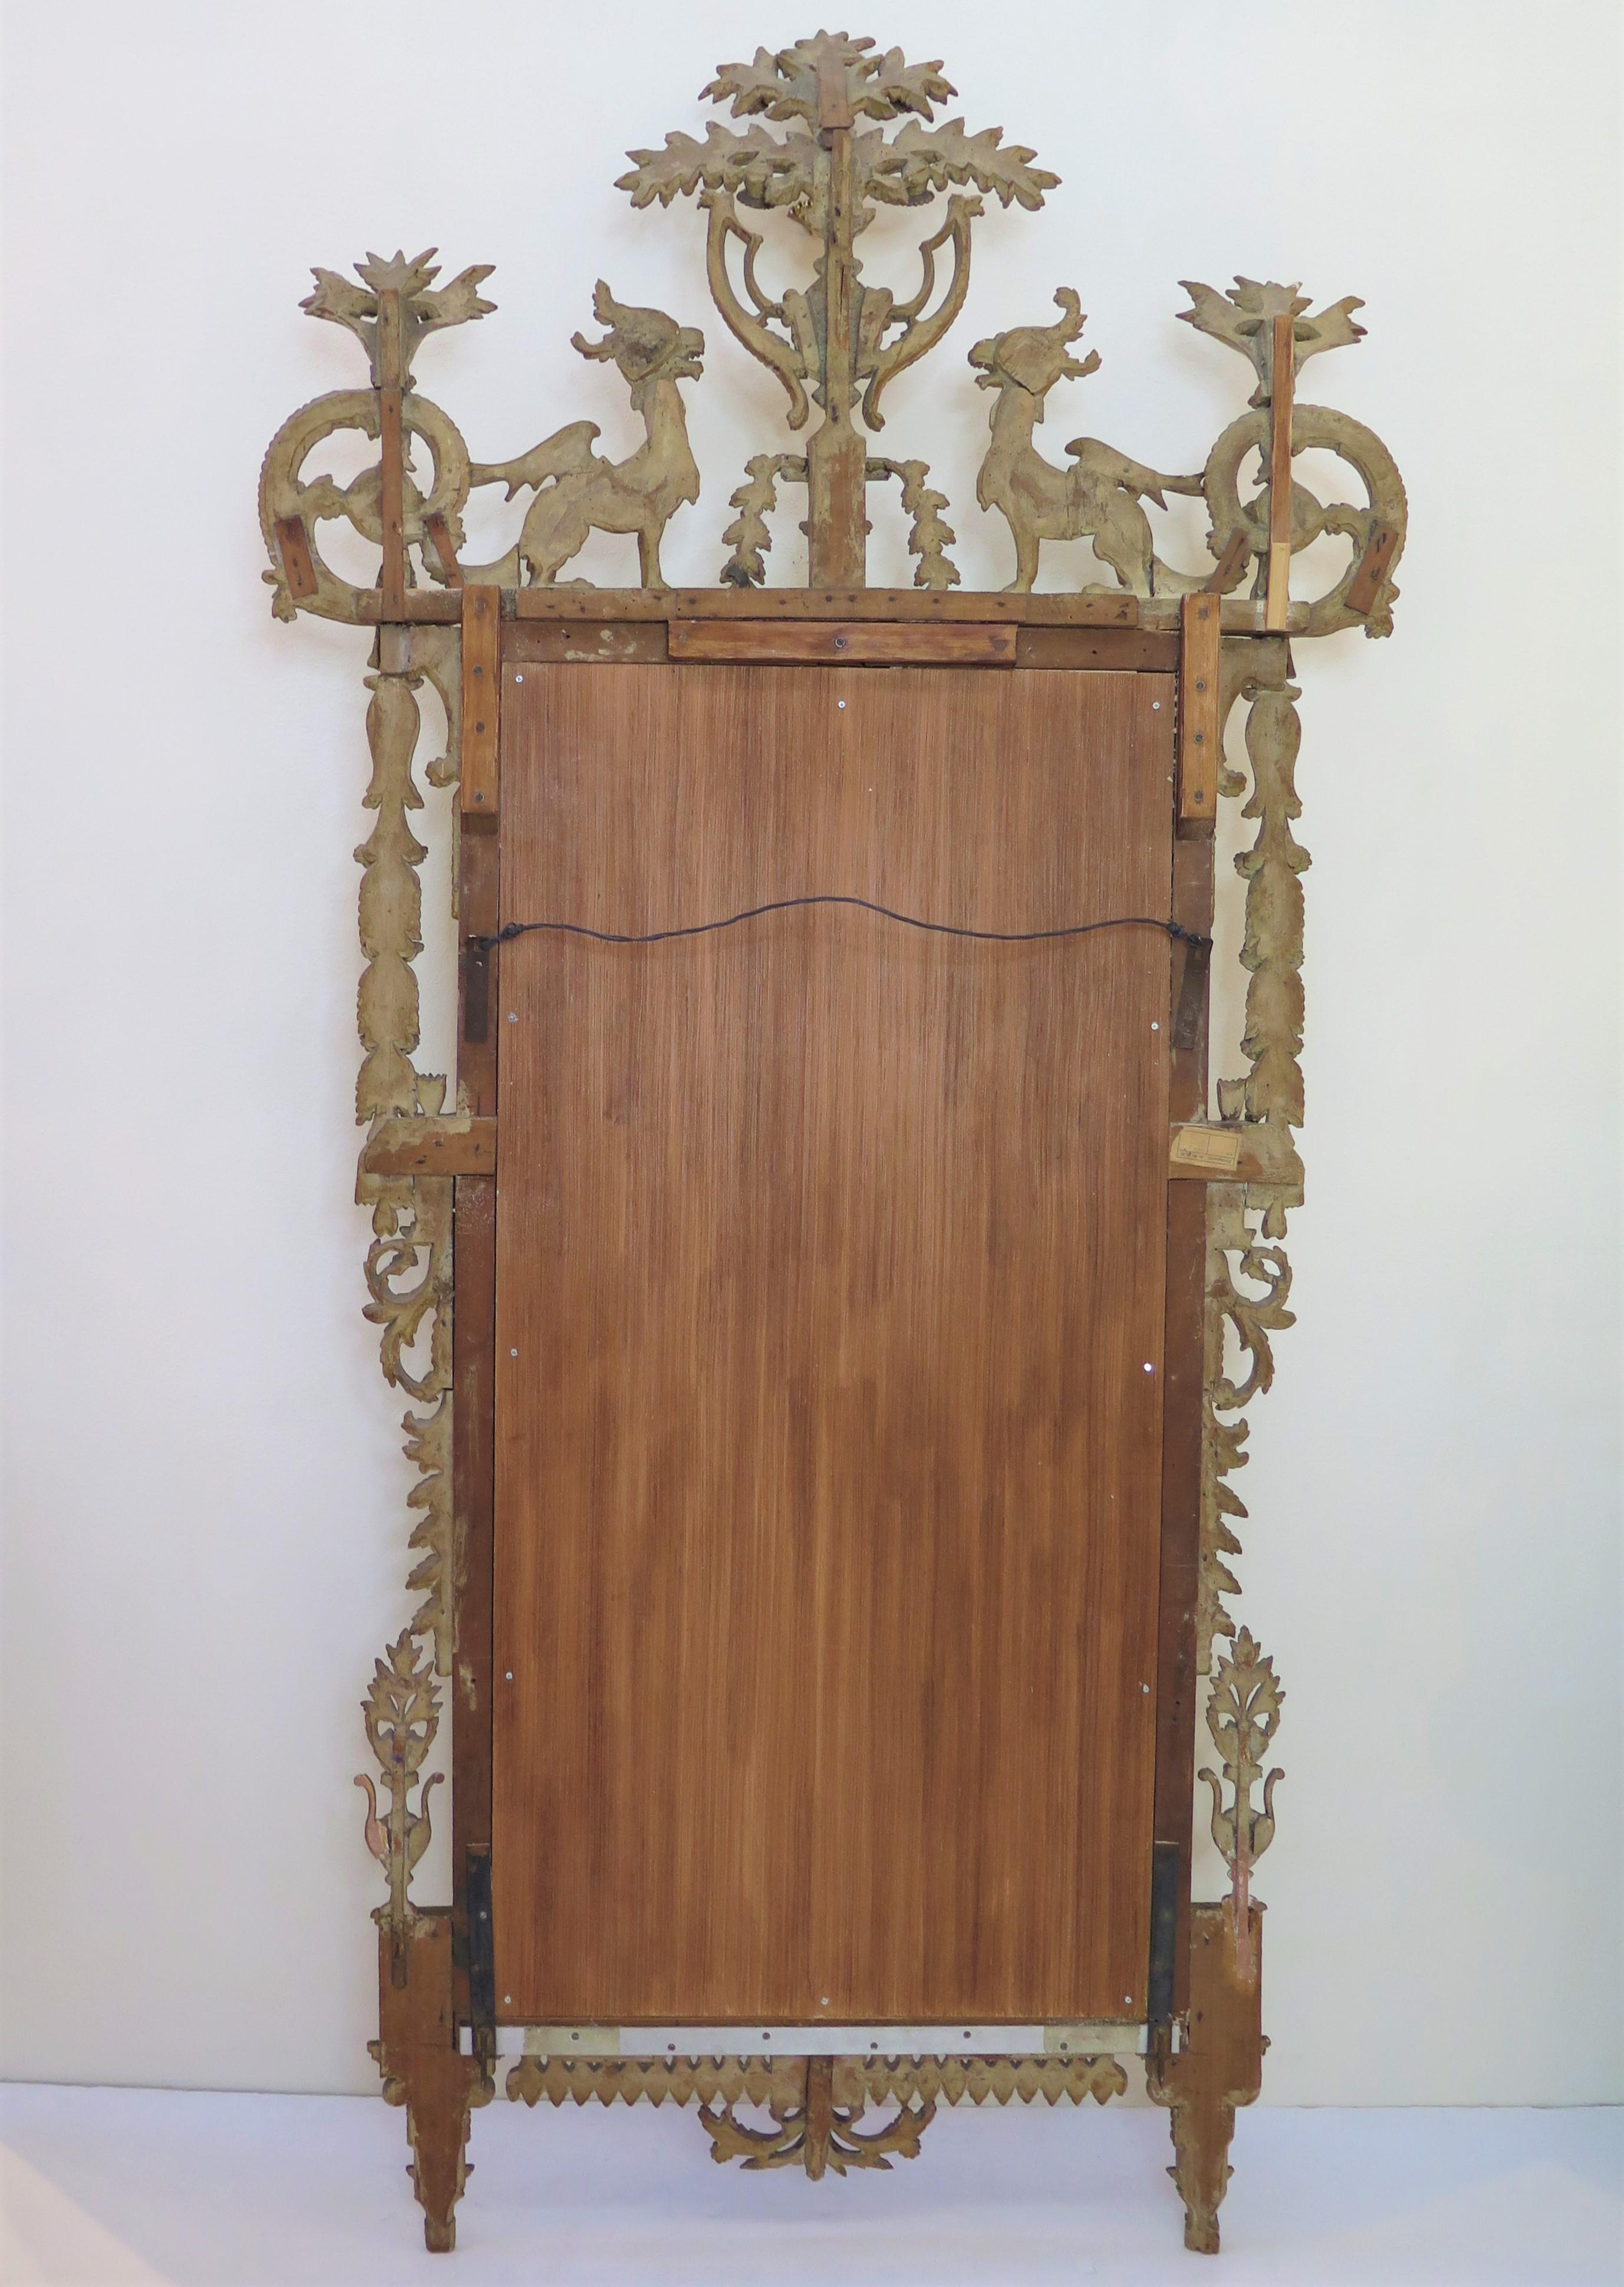 18th Century Italian (Tuscan) Neoclassical Giltwood Pier Glass For Sale 8